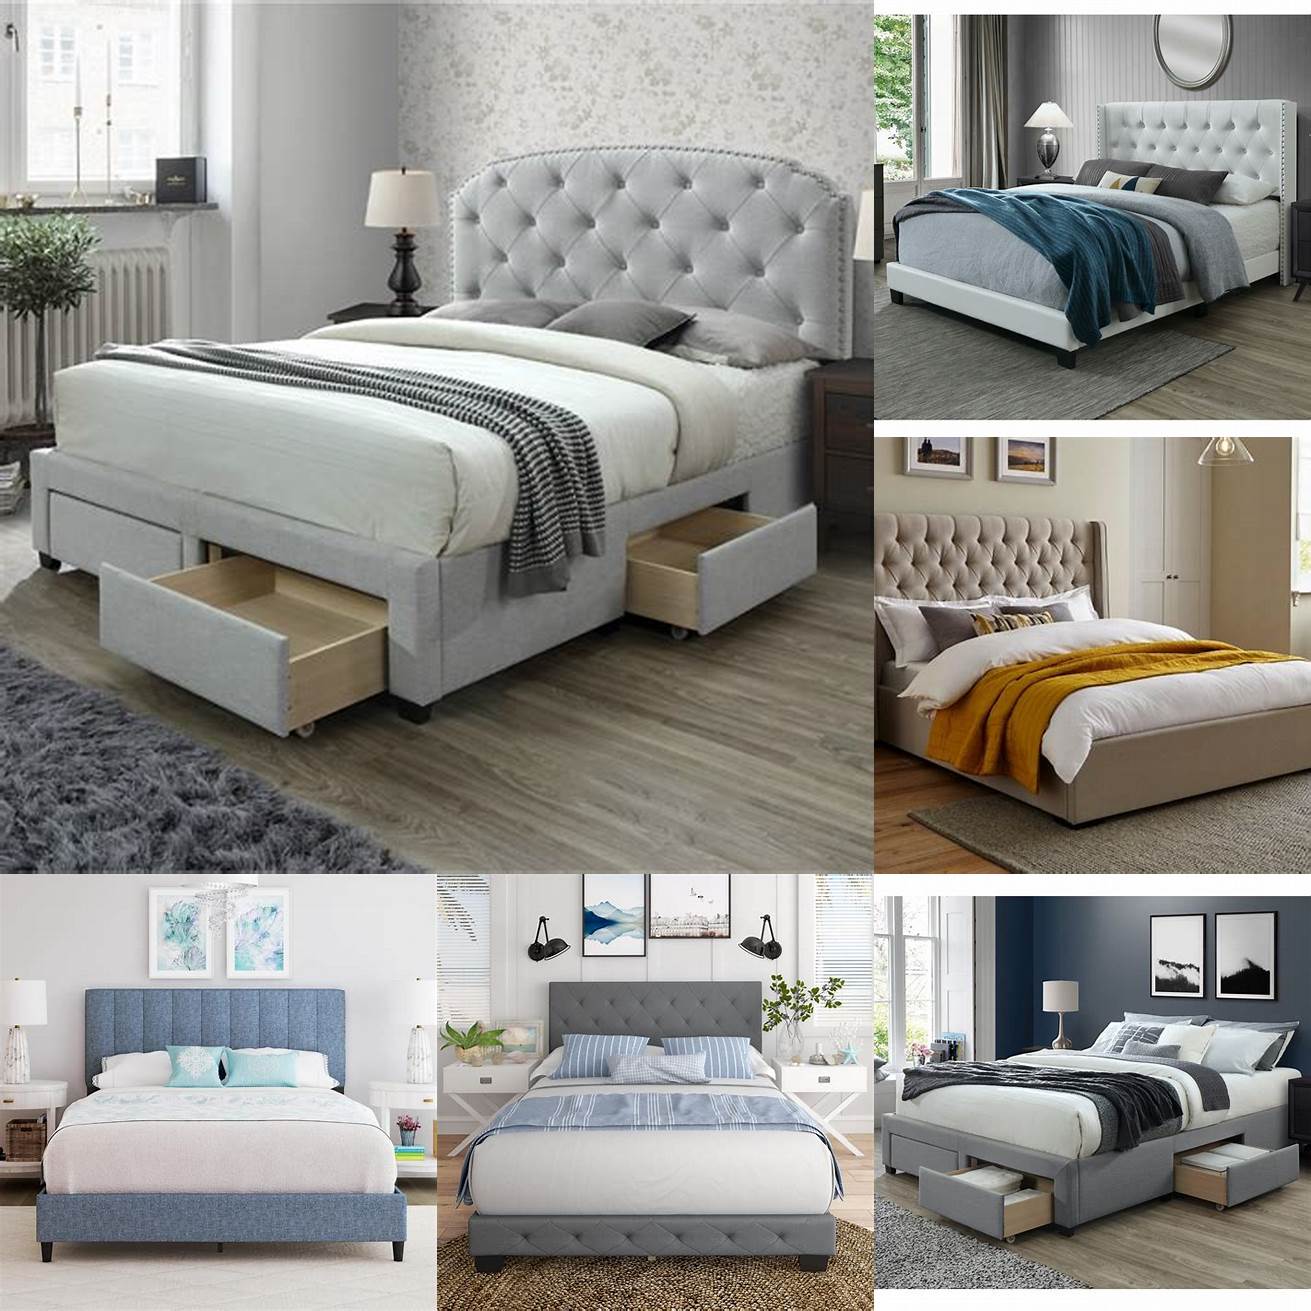 Durability - Upholstered beds are typically made with high-quality materials which means they are built to last